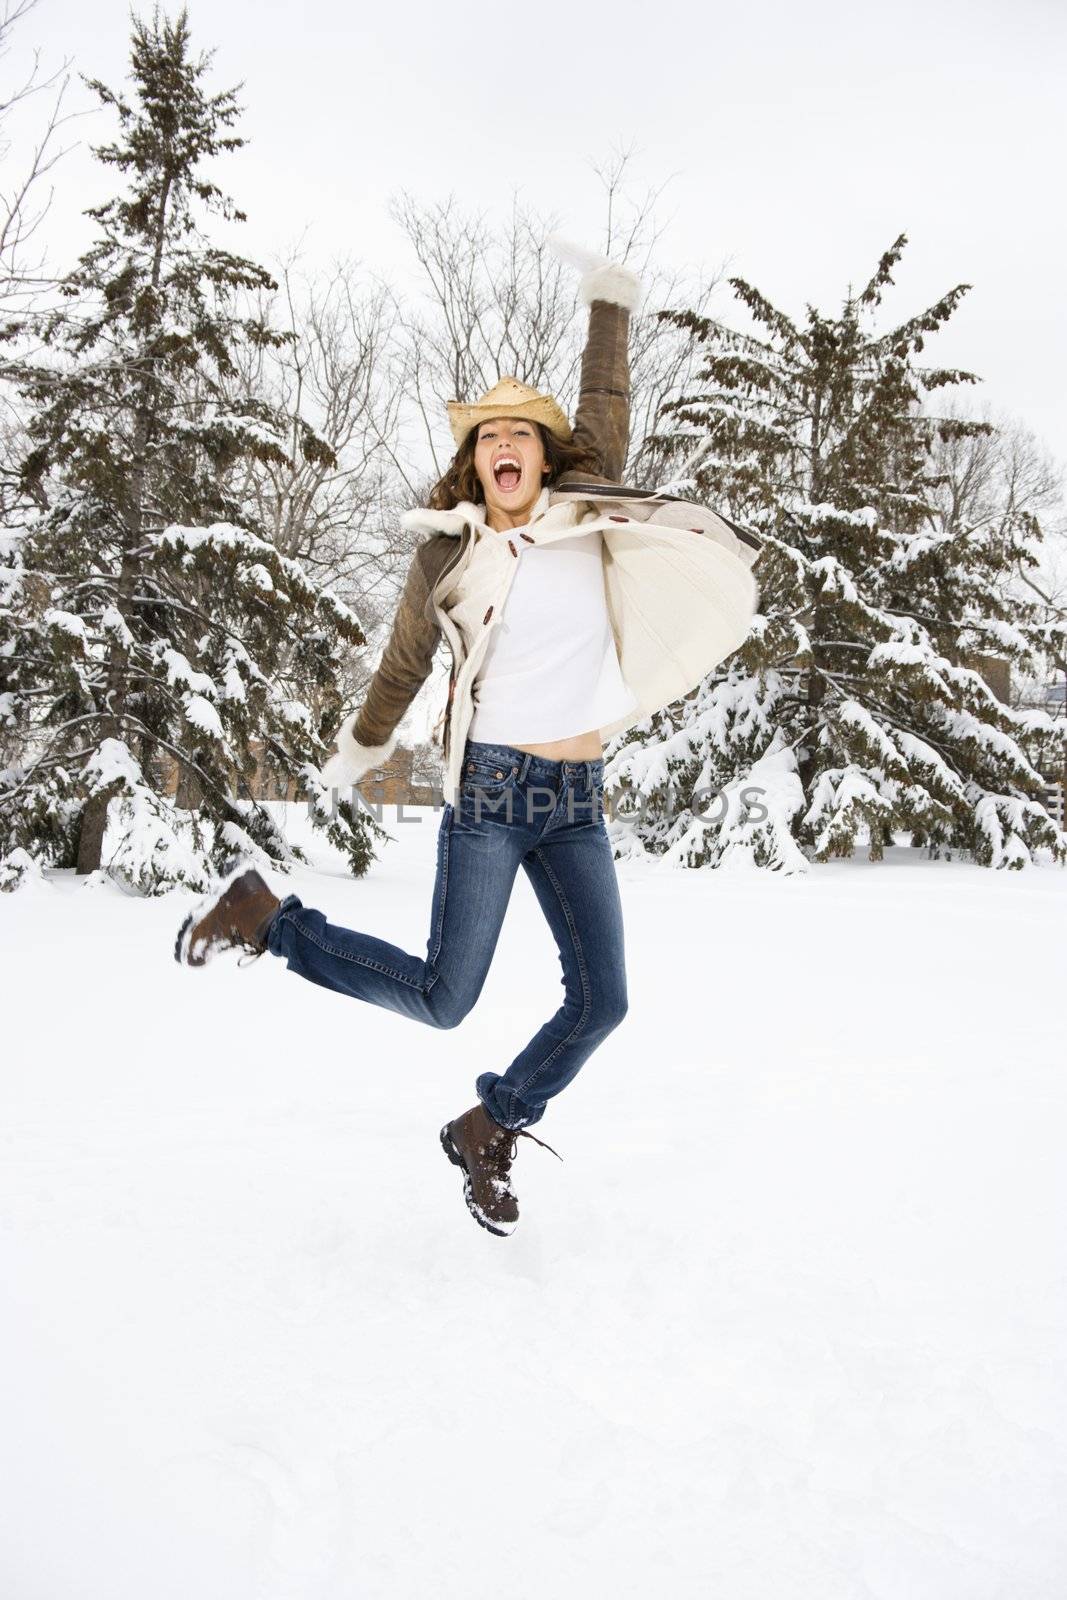 Caucasian young adult female leaping into the air in snowly climate wearing straw cowboy hat.